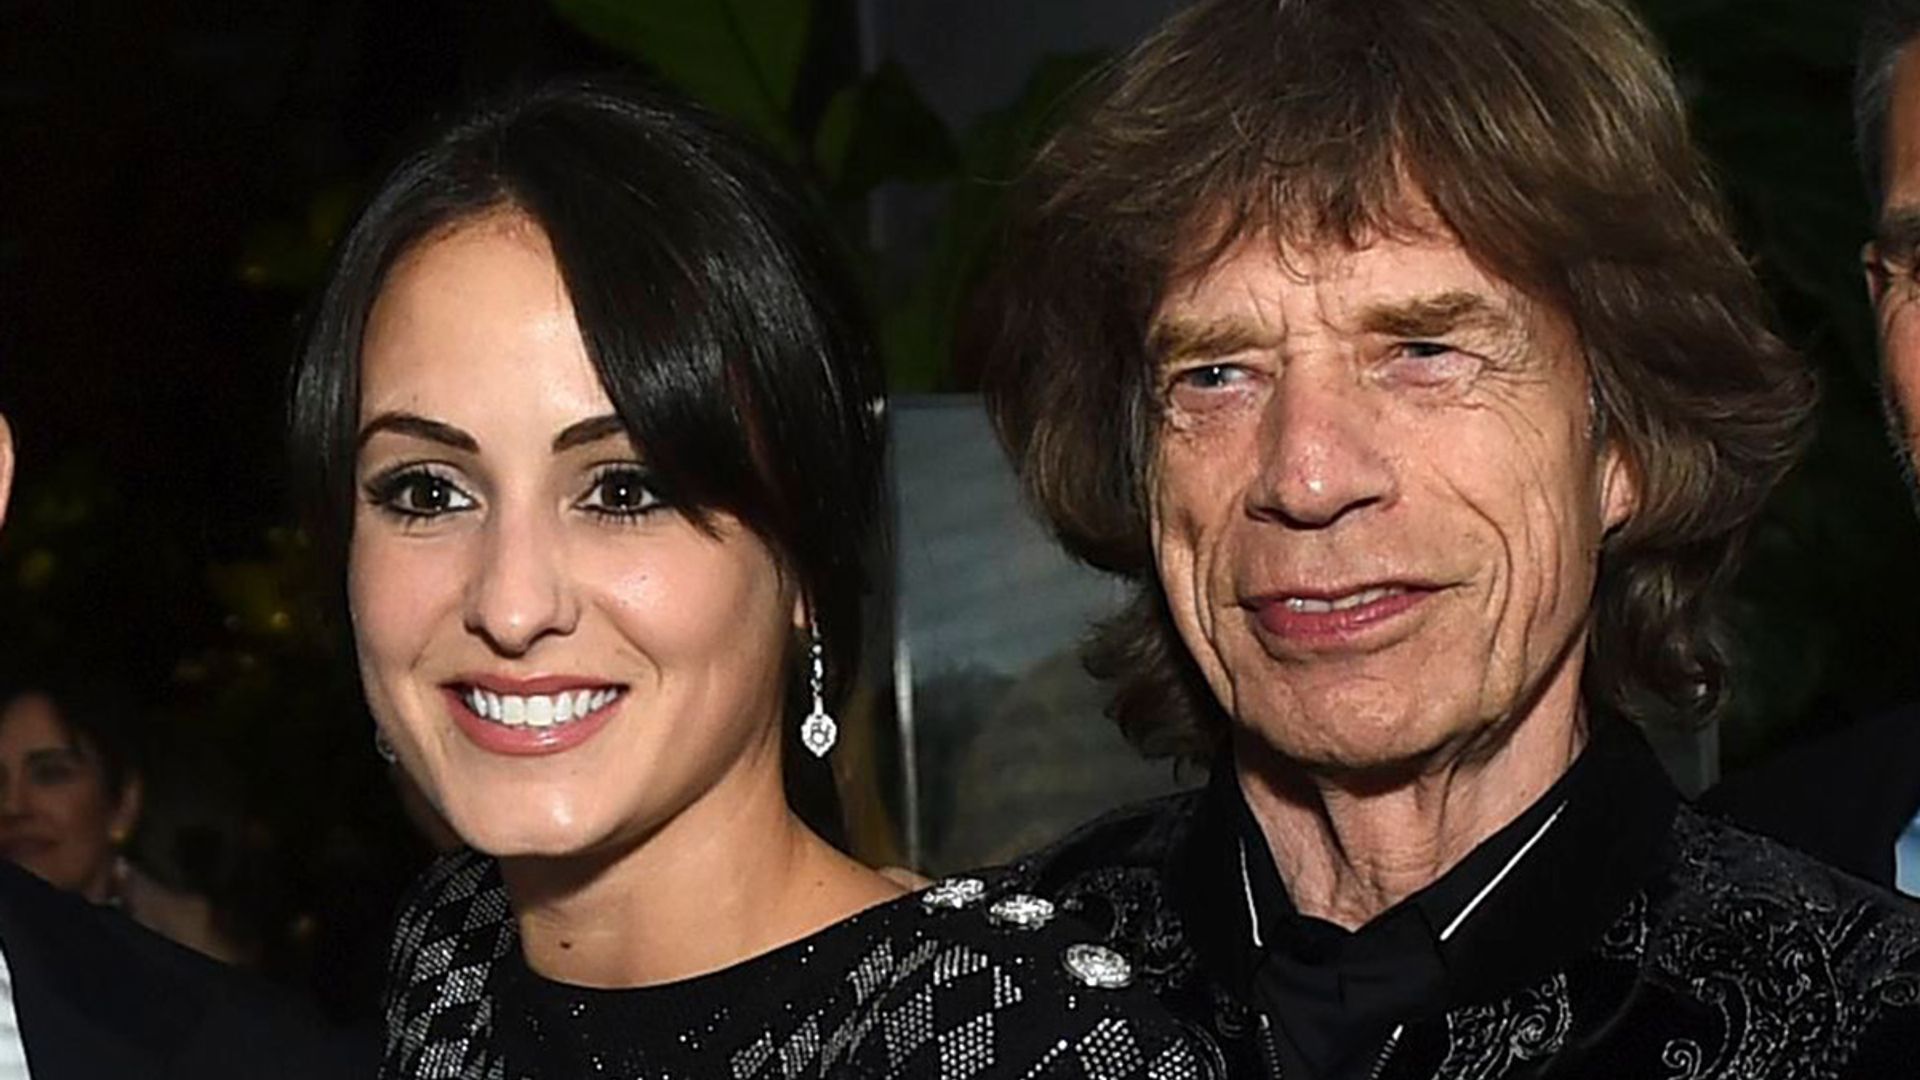 Mick Jagger, 77, appears in very rare photo with his four-year-old son